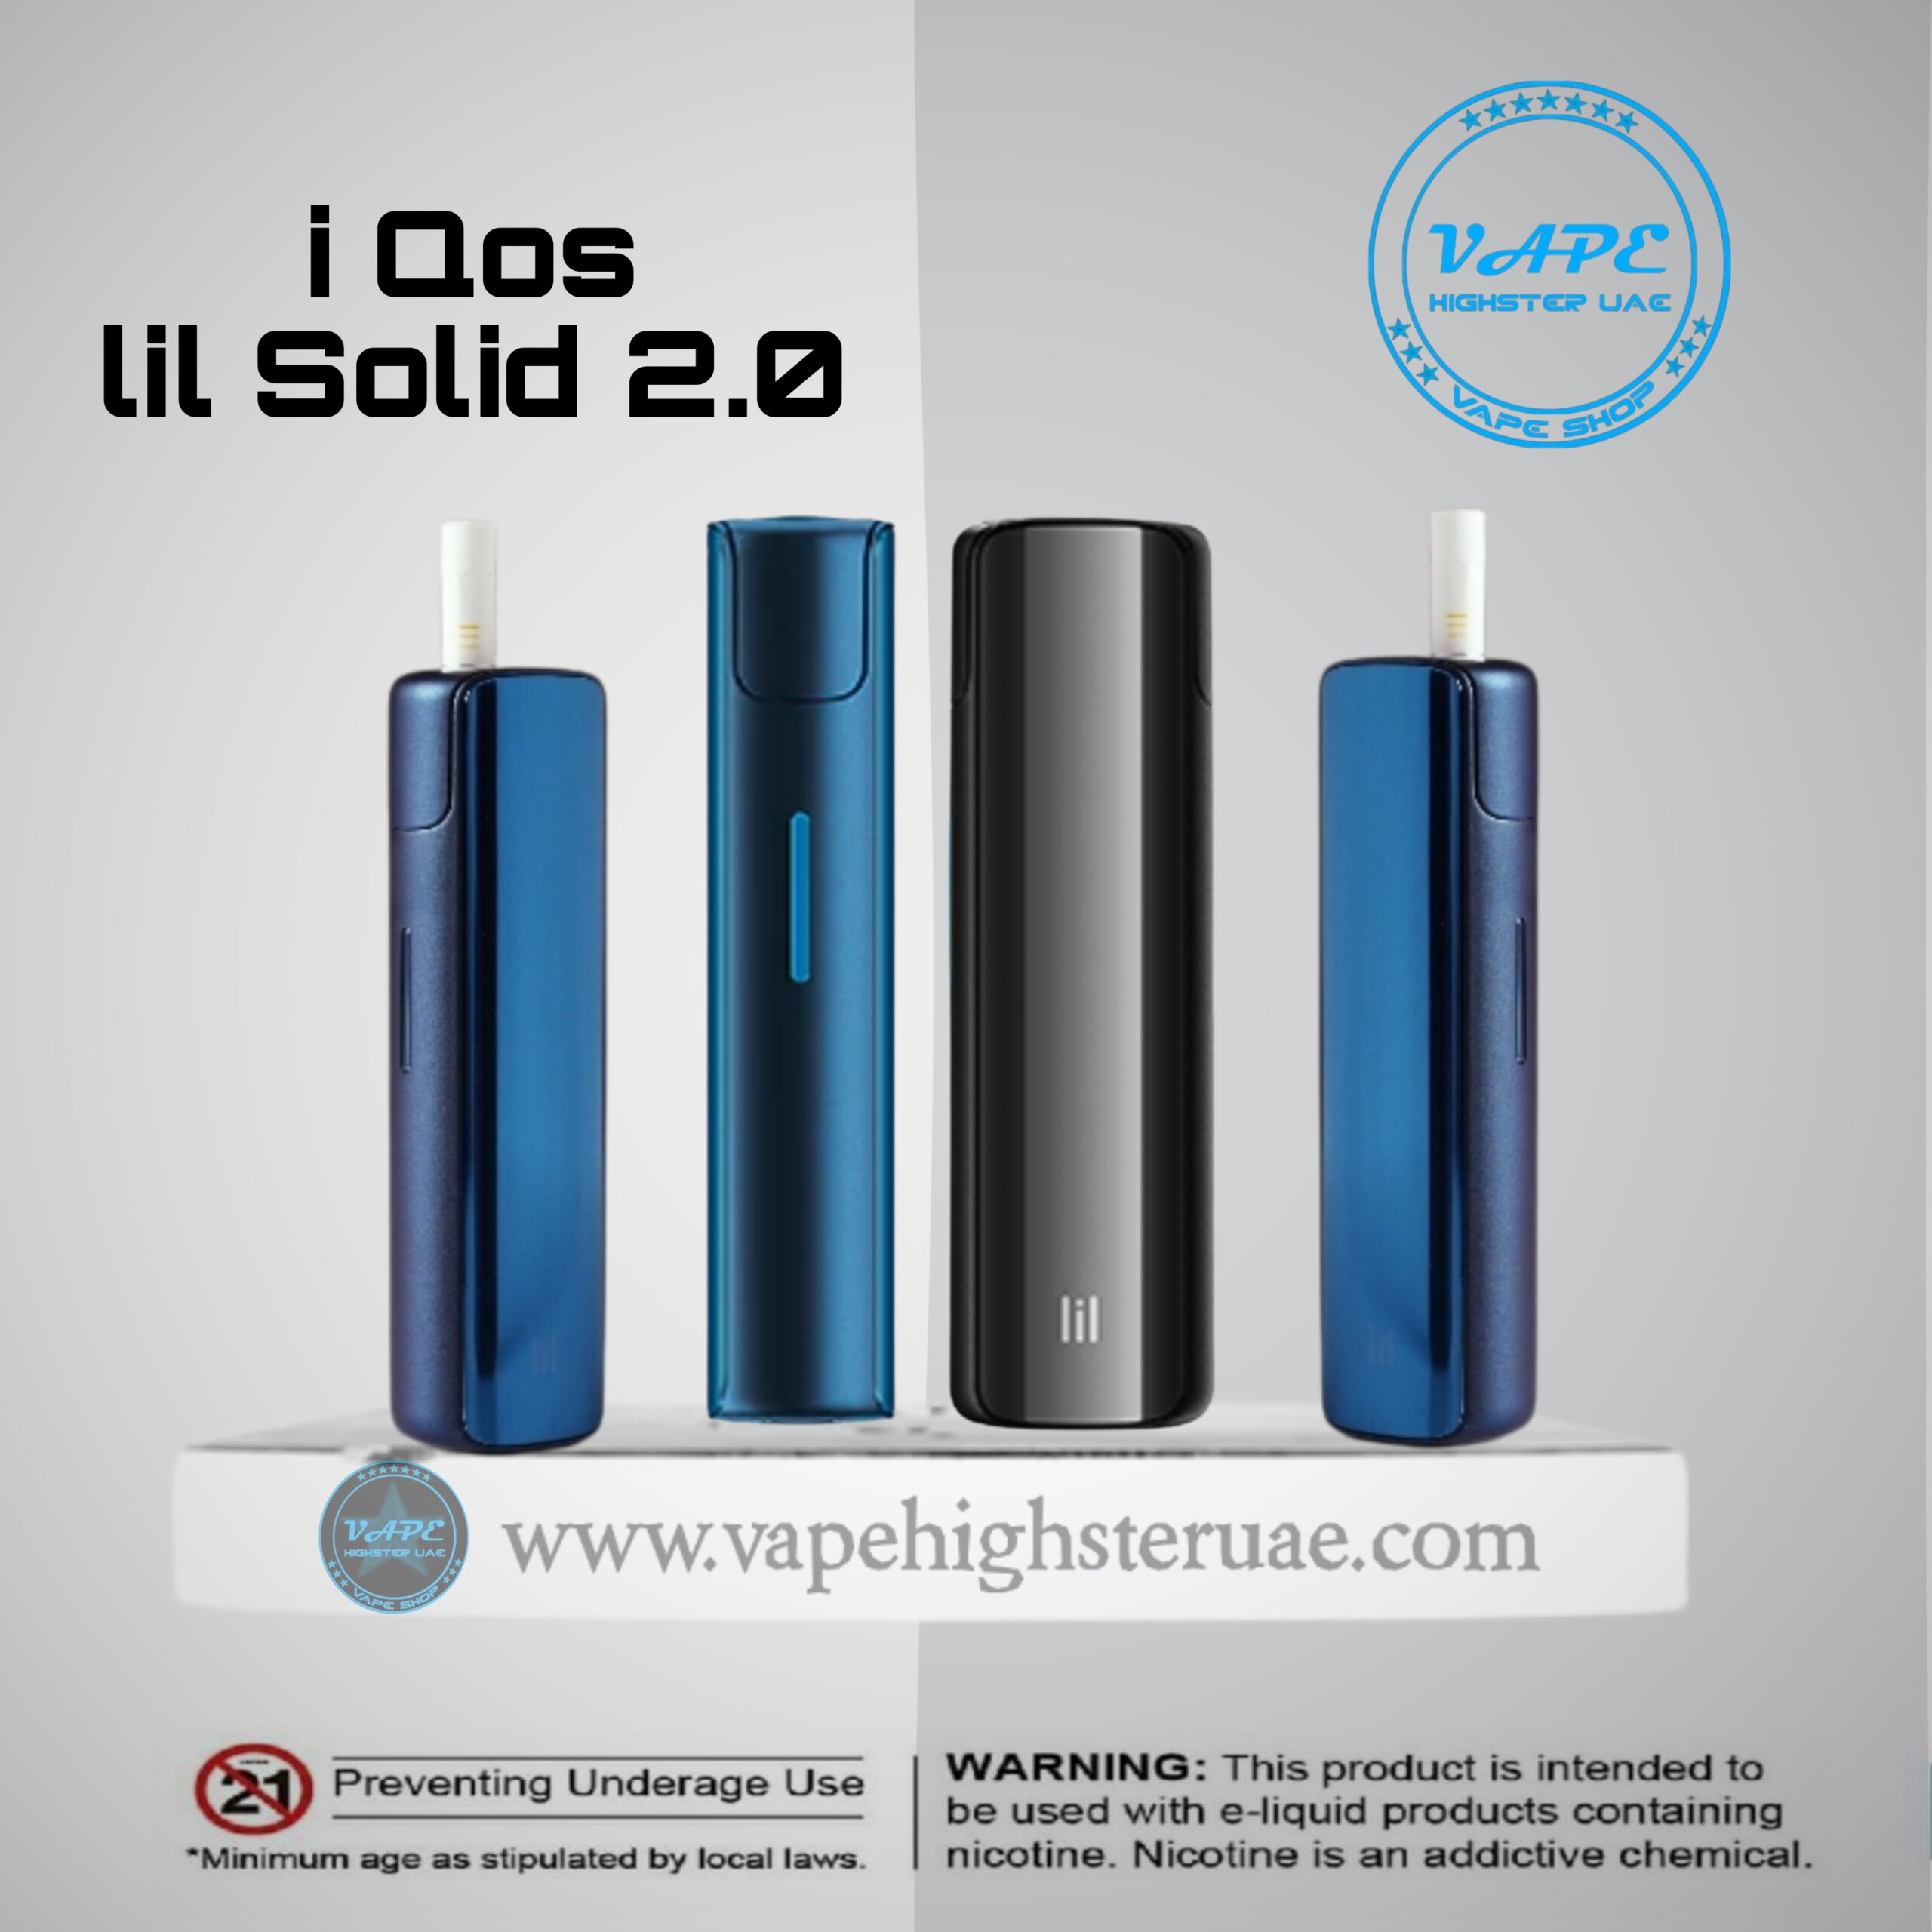 http://vapehighsteruae.com/wp-content/uploads/2022/06/I-qos-lil-SOLID-2.0-kit-for-heets--scaled.jpg